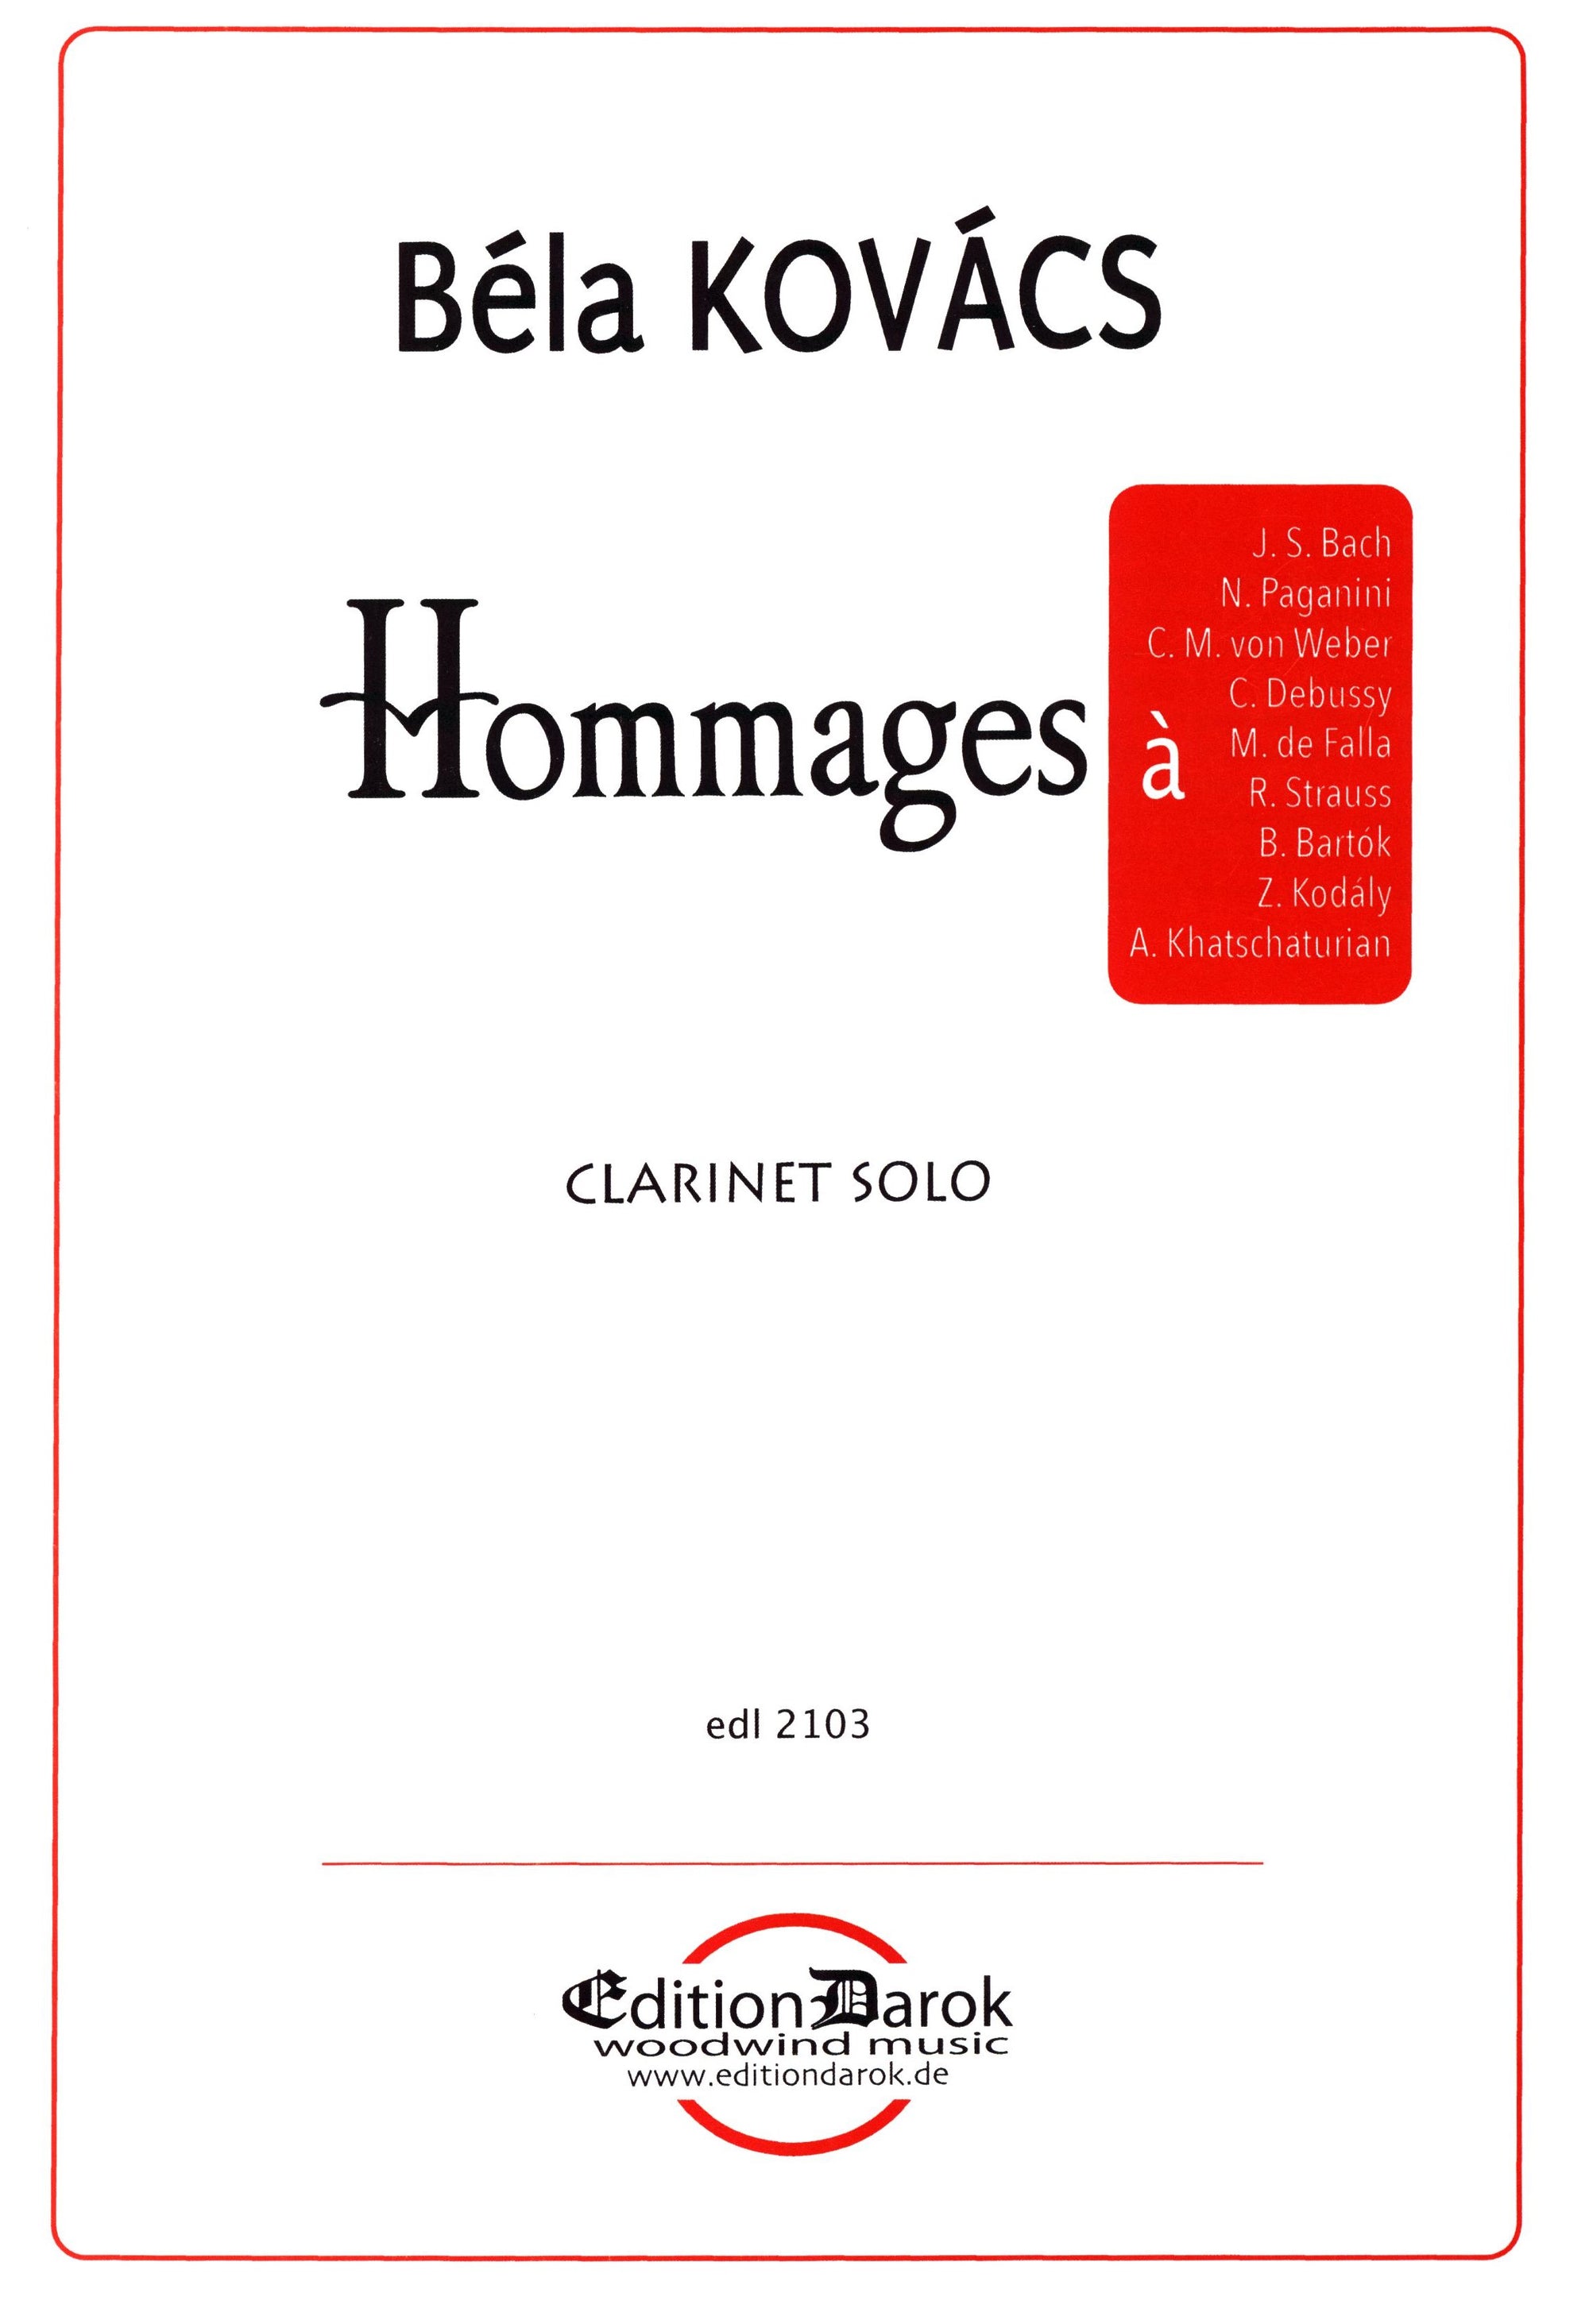 Kovács: Hommages to... (for clarinet)